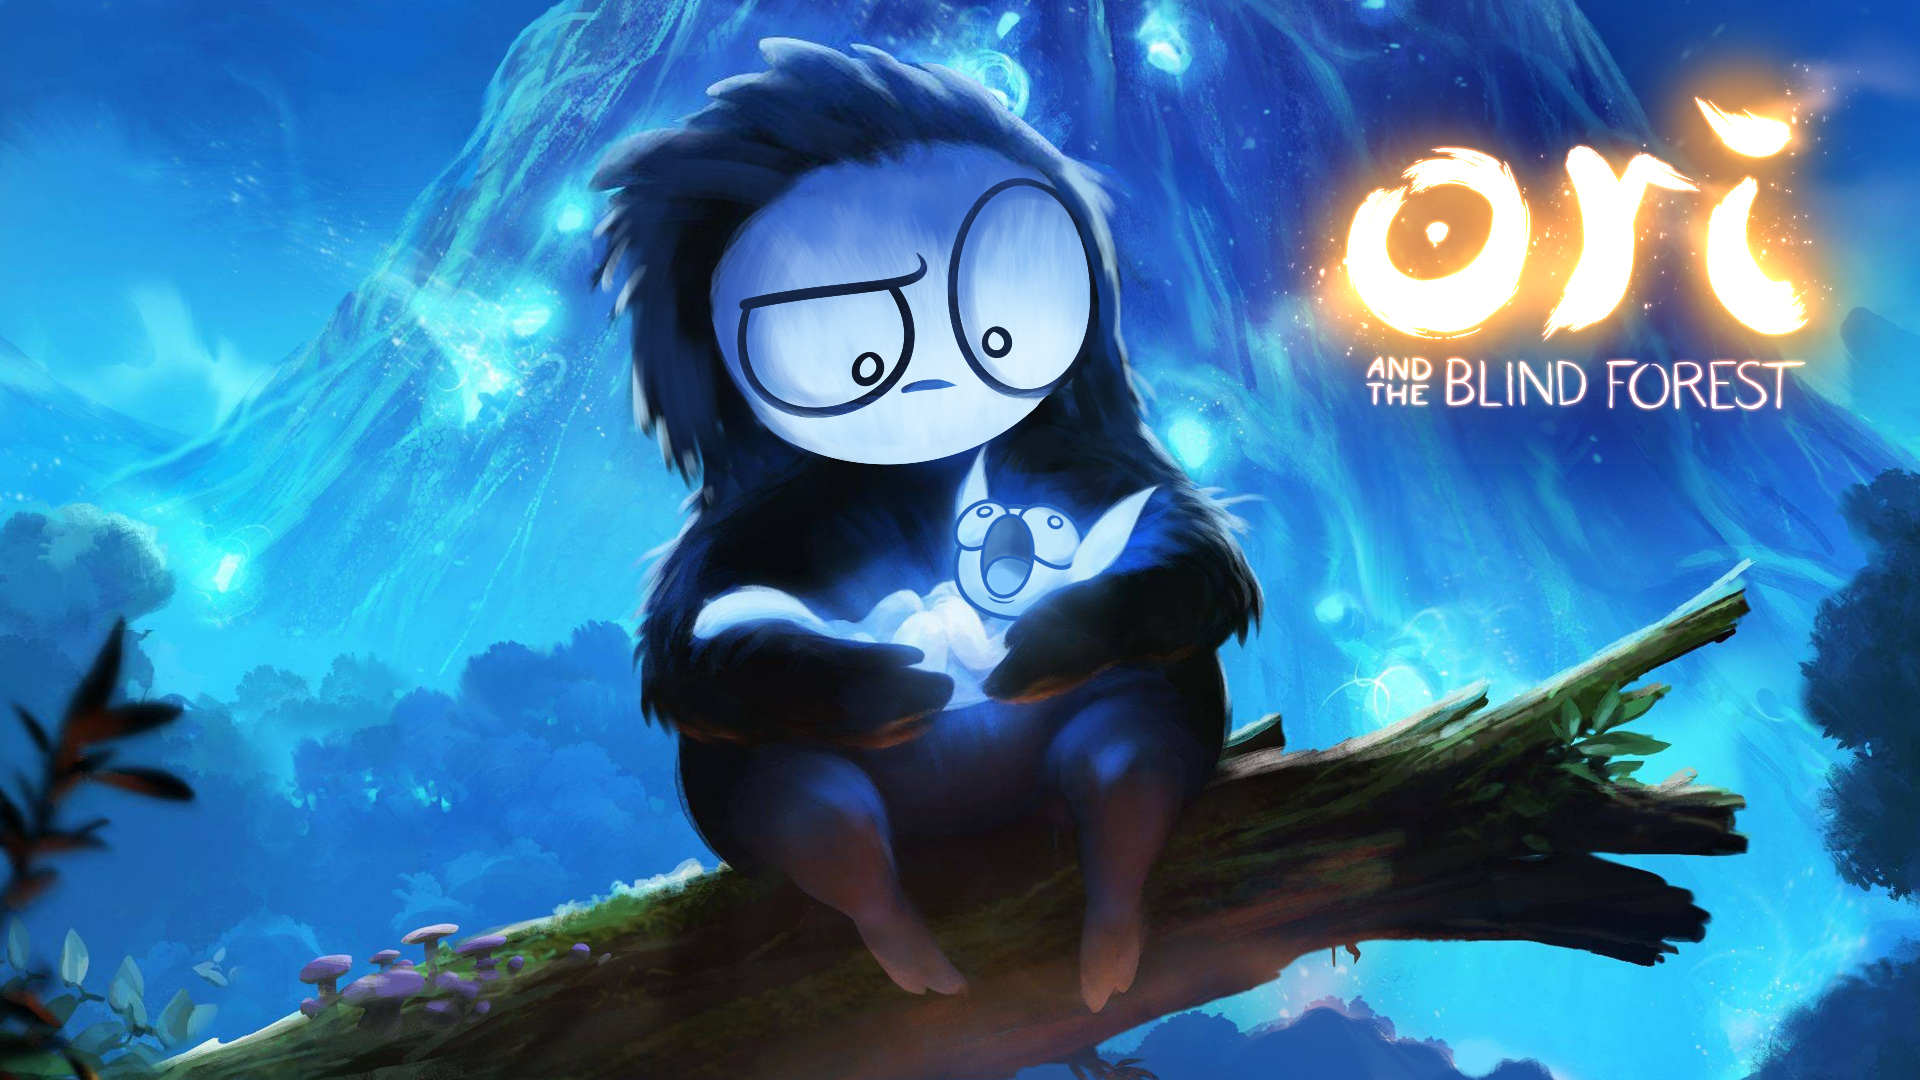 Loading Artist » Ori and the Blind Forest